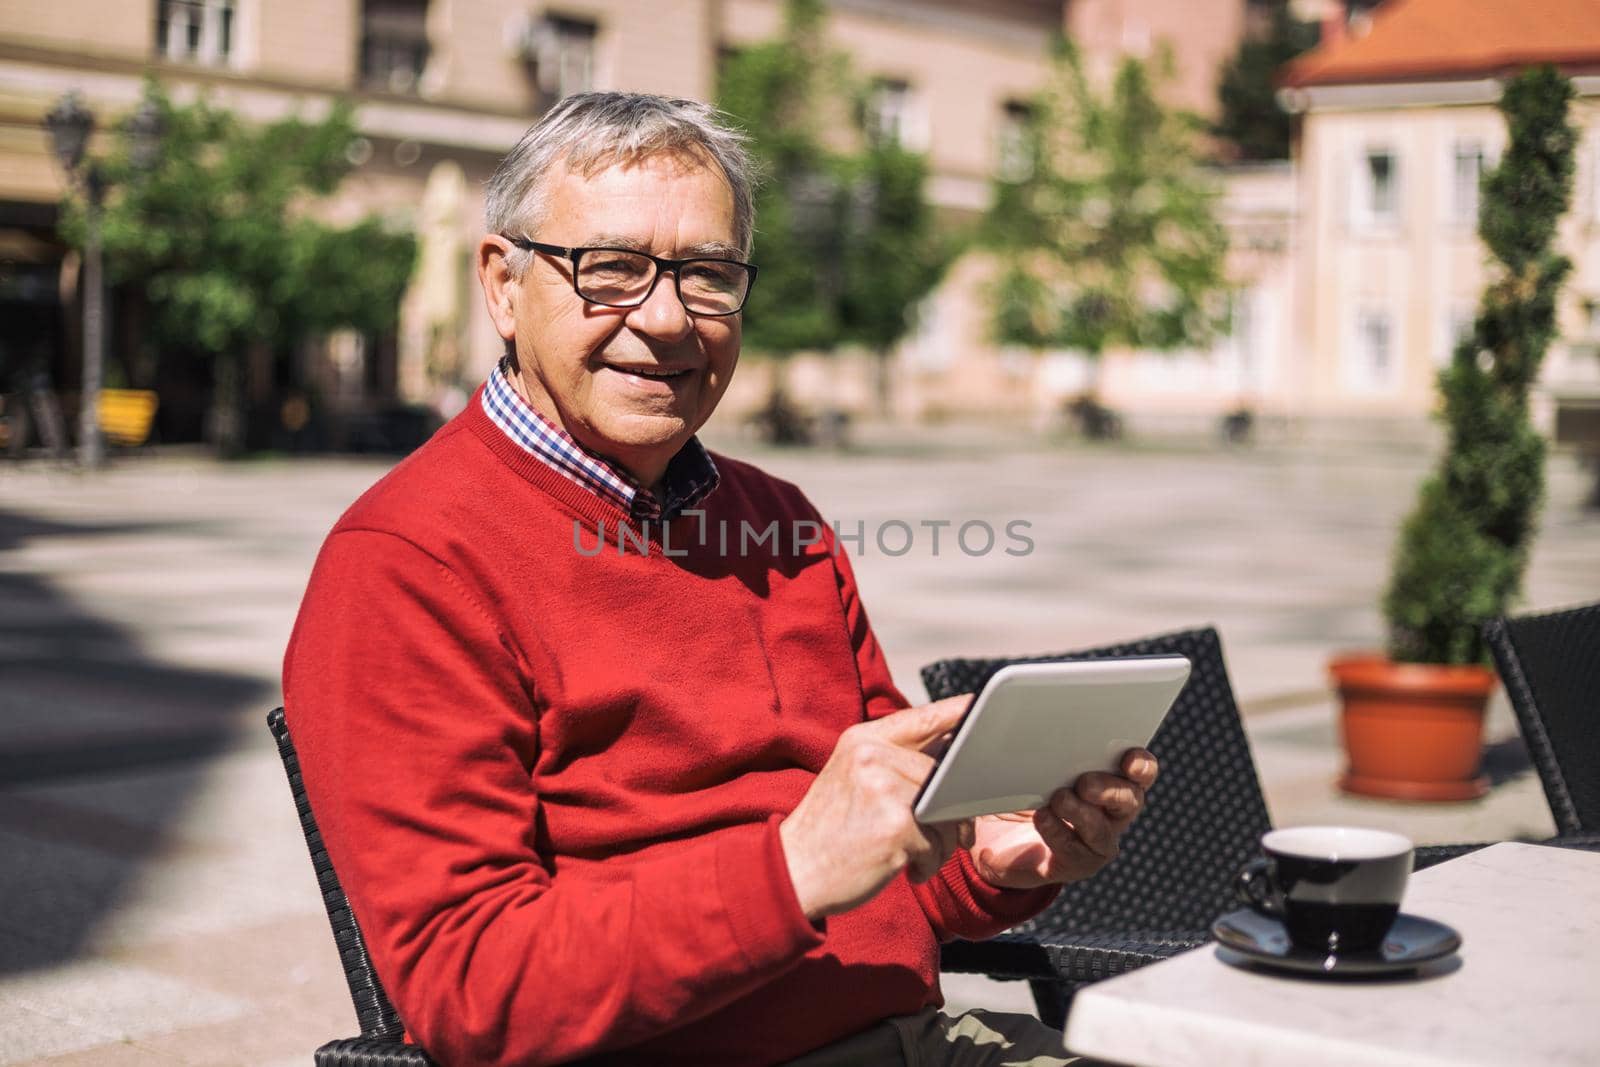 Senior man using digital tablet while drinking coffee at the bar.Image is intentionally toned.